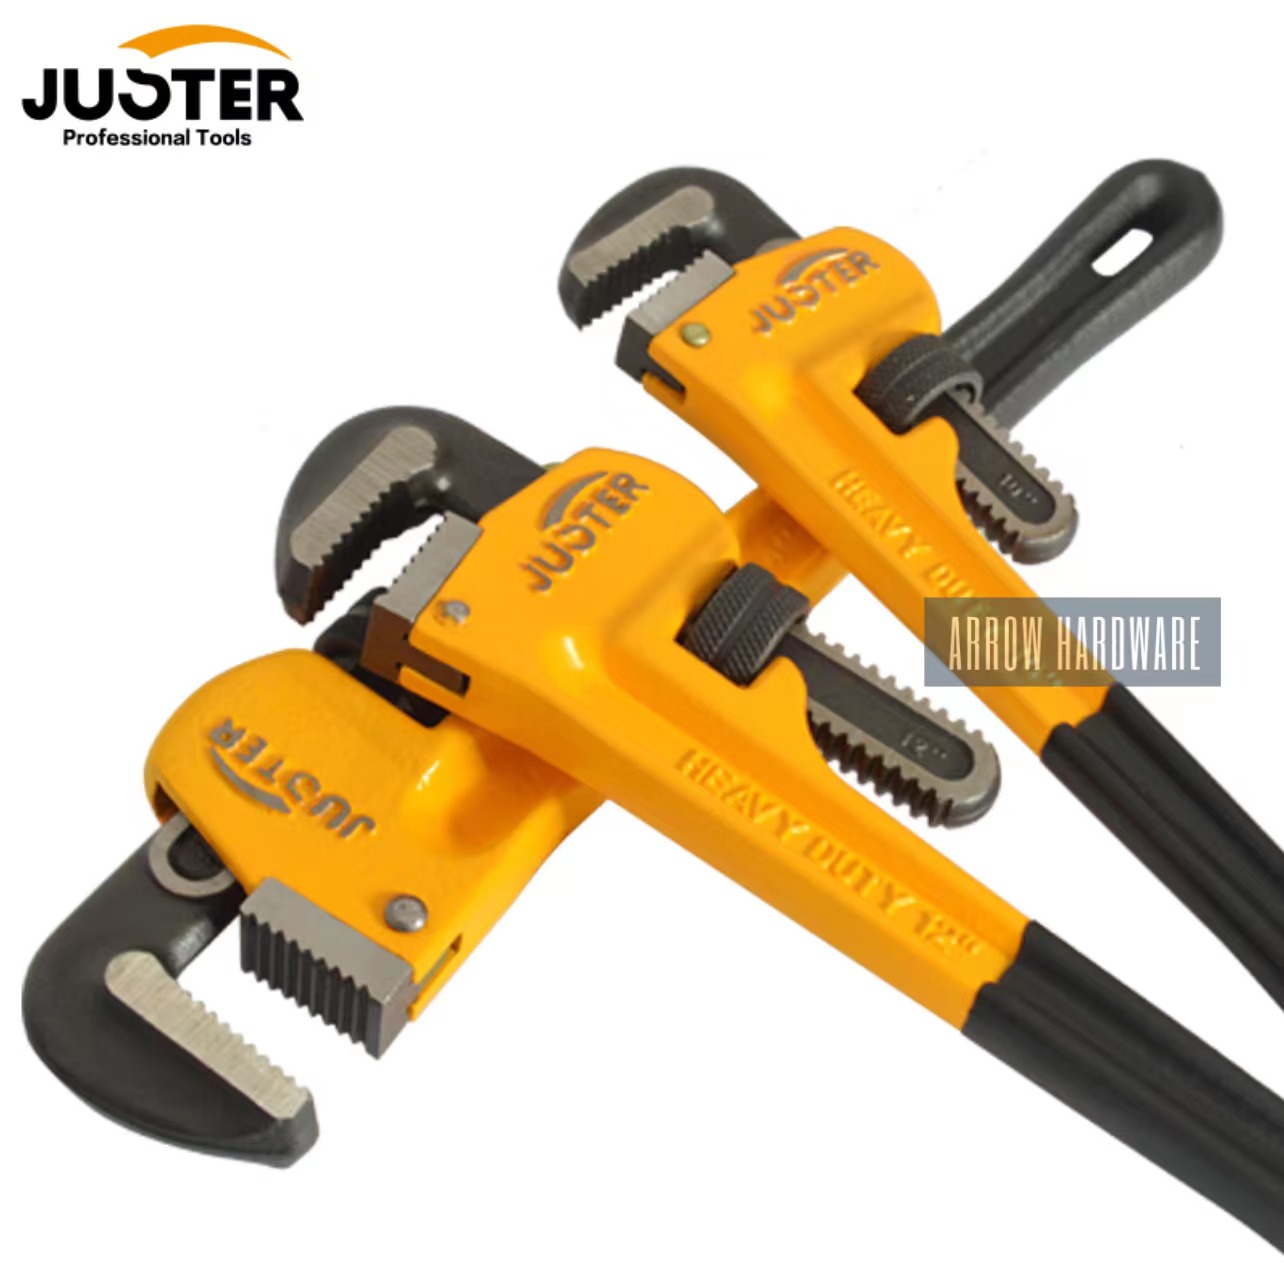 JUSTER Heavy Duty Pipes Wrench (8, 10, 12, 14, 18, 24, 36, 48)